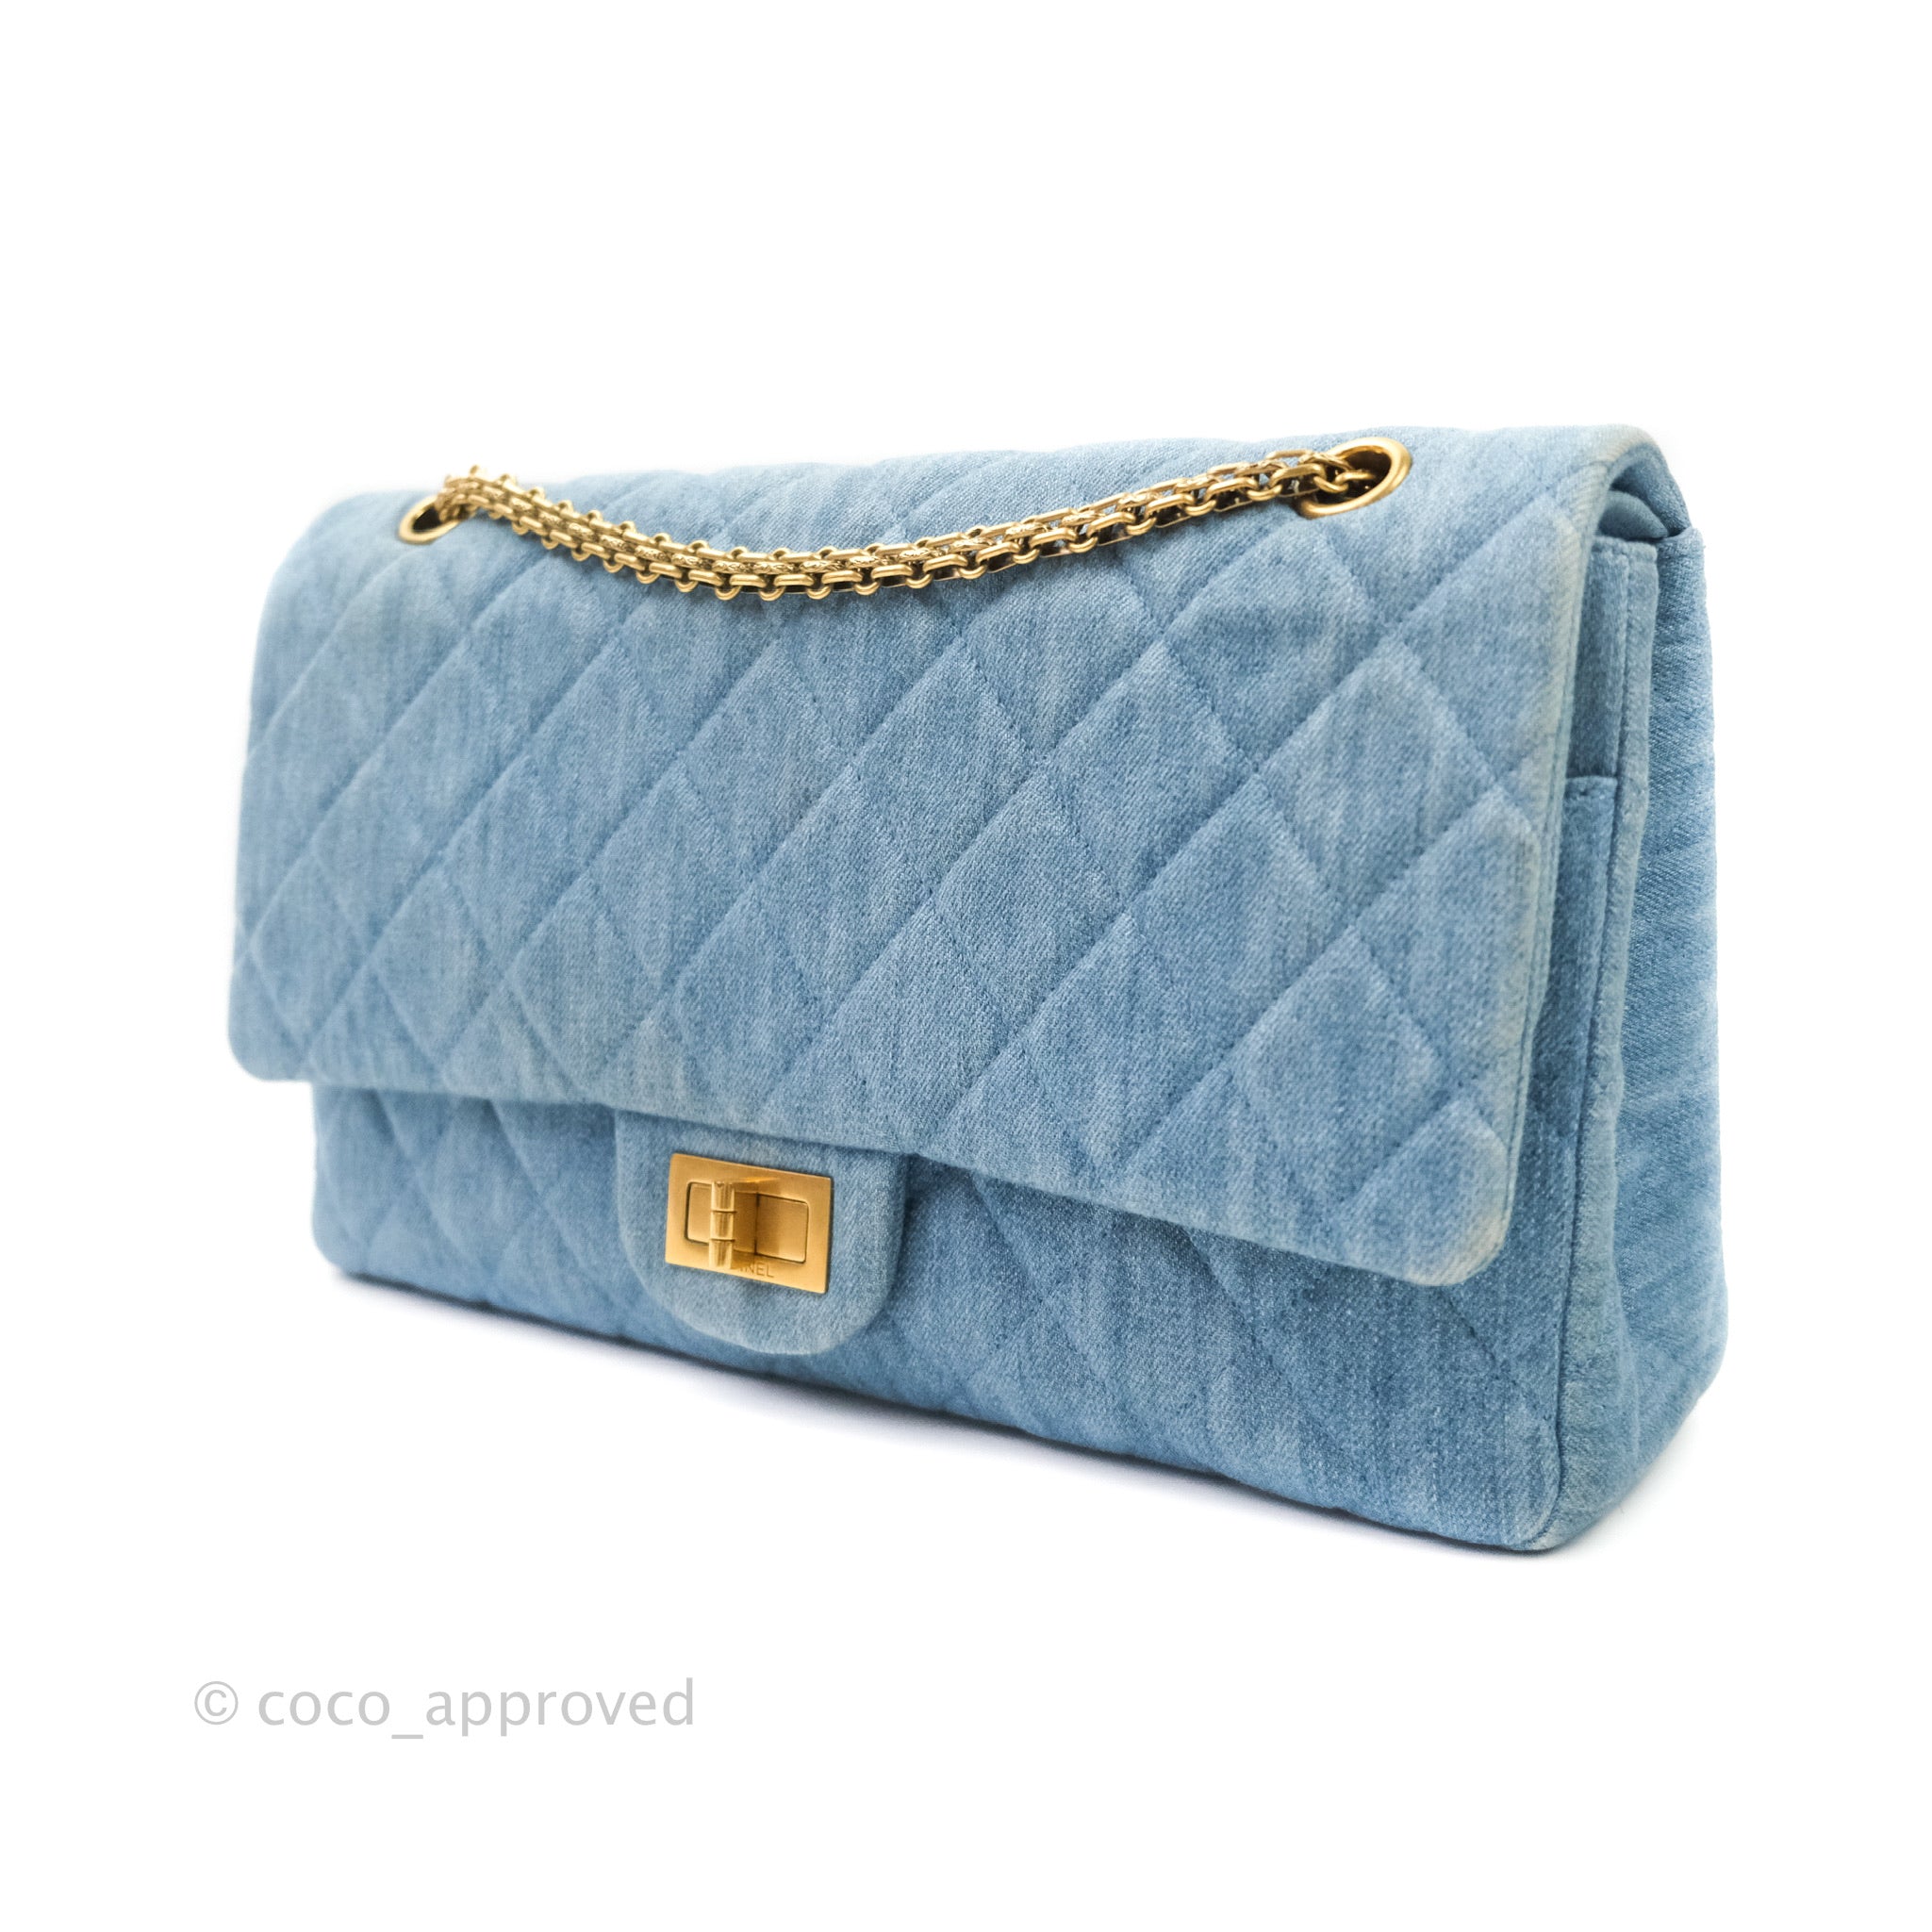 Chanel Blue Quilted Patent Leather Reissue 2.55 Classic 226 Flap